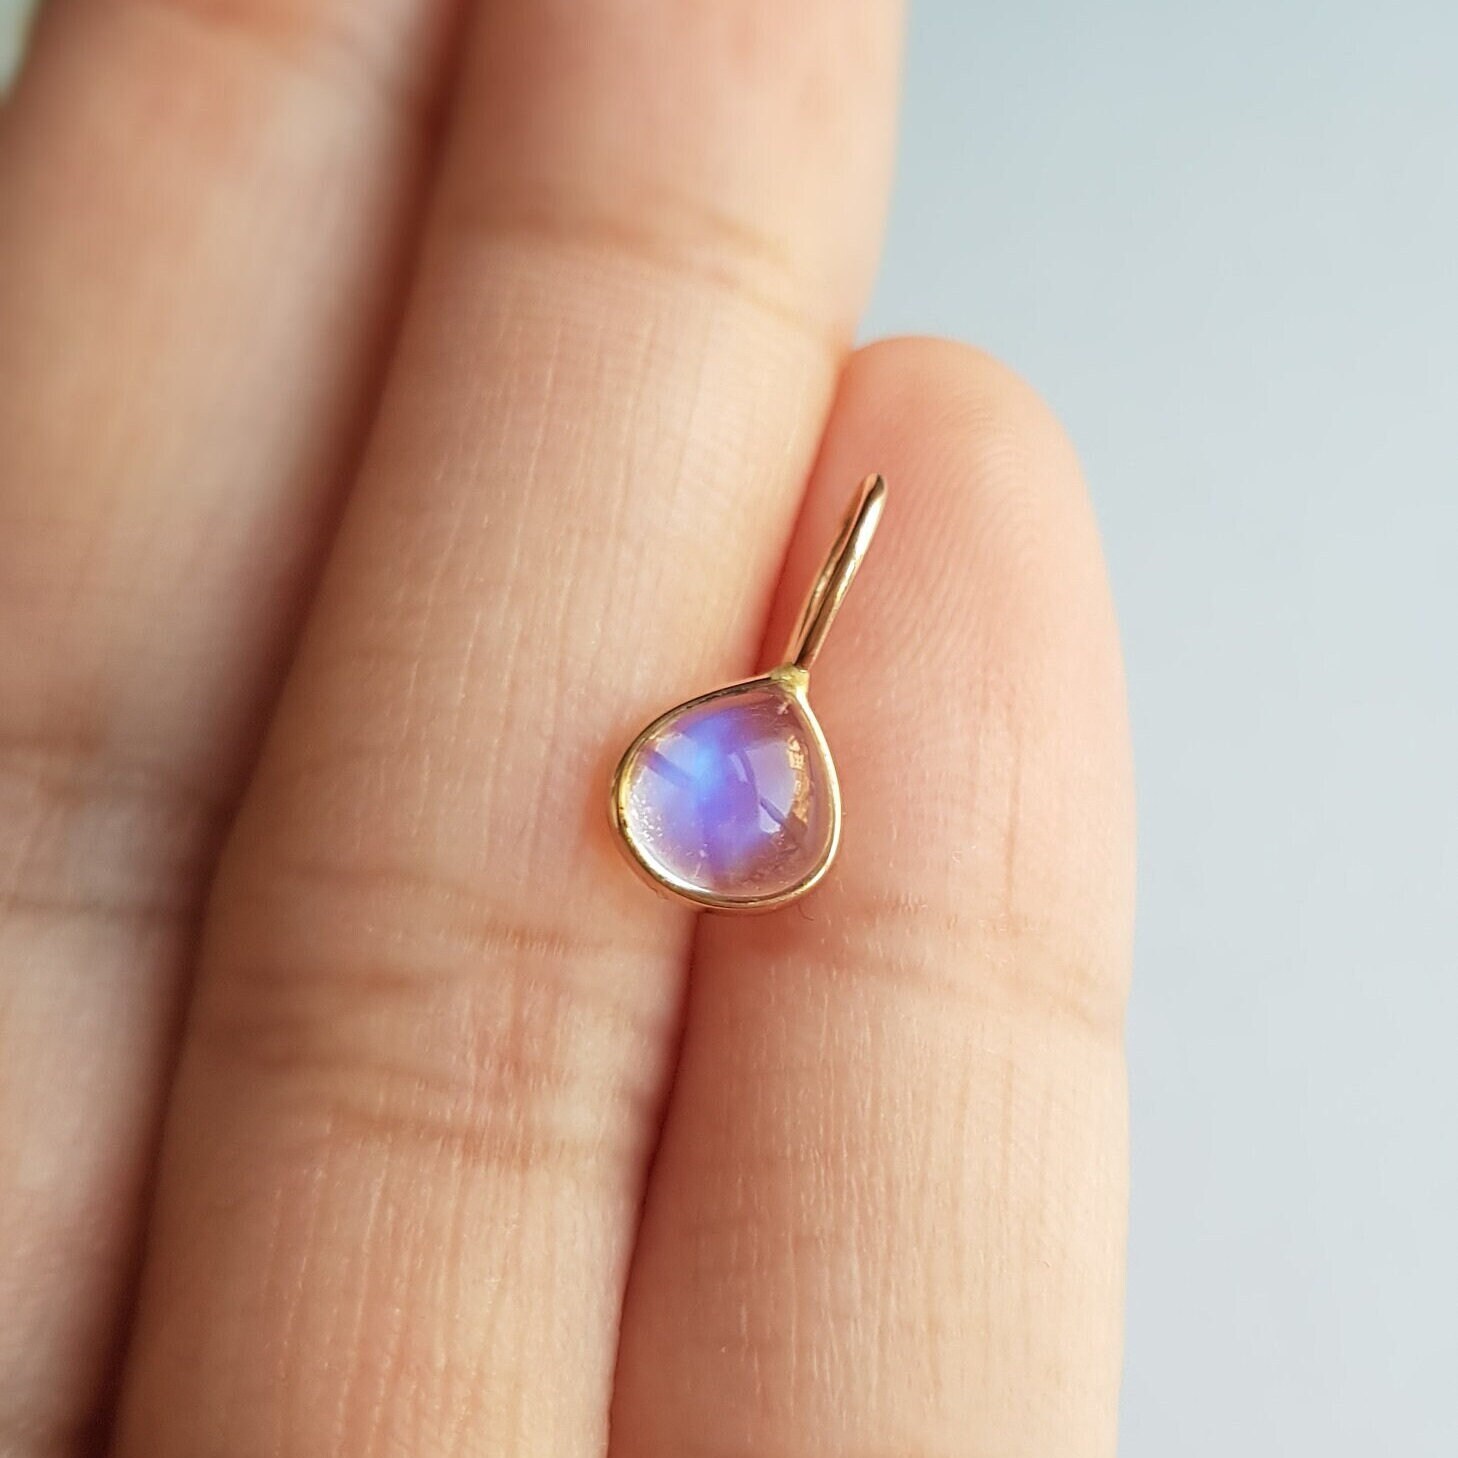 Etsy - Moon phase moonstone ring. Say that three times fast. https://etsy.me/2OsjbAy  | Facebook